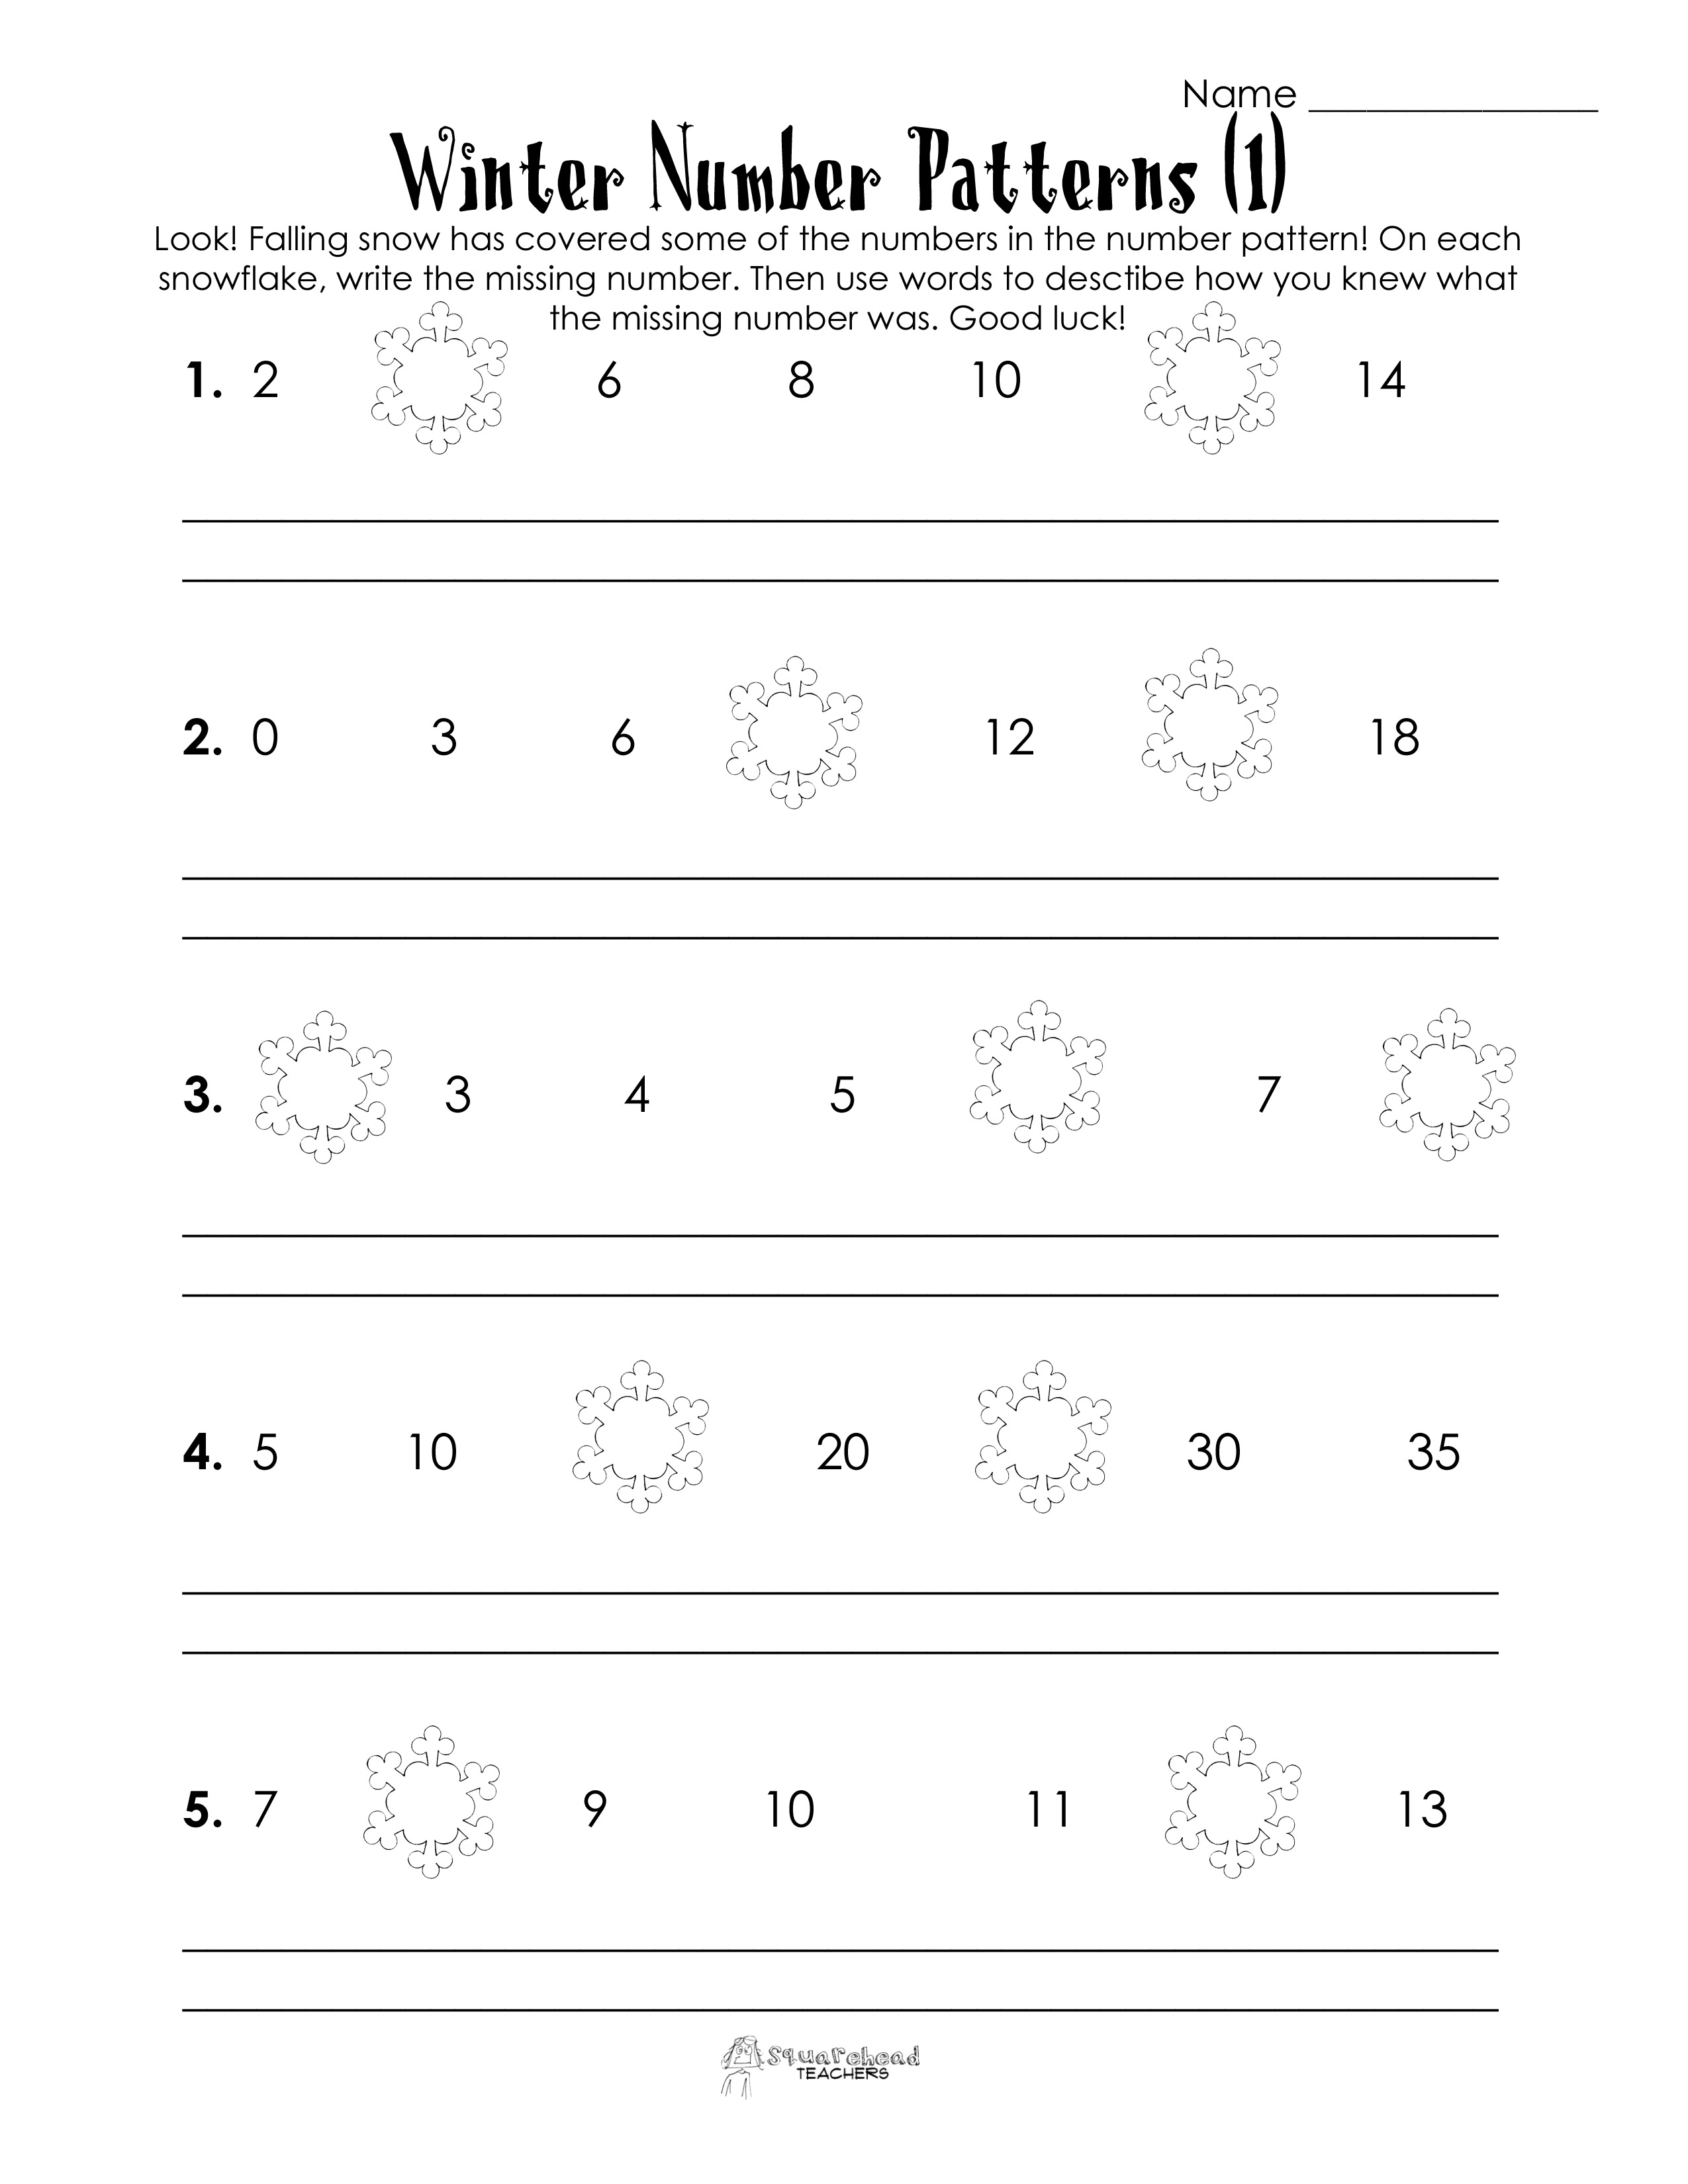 Patterns In Numbers Worksheets 4th Grade